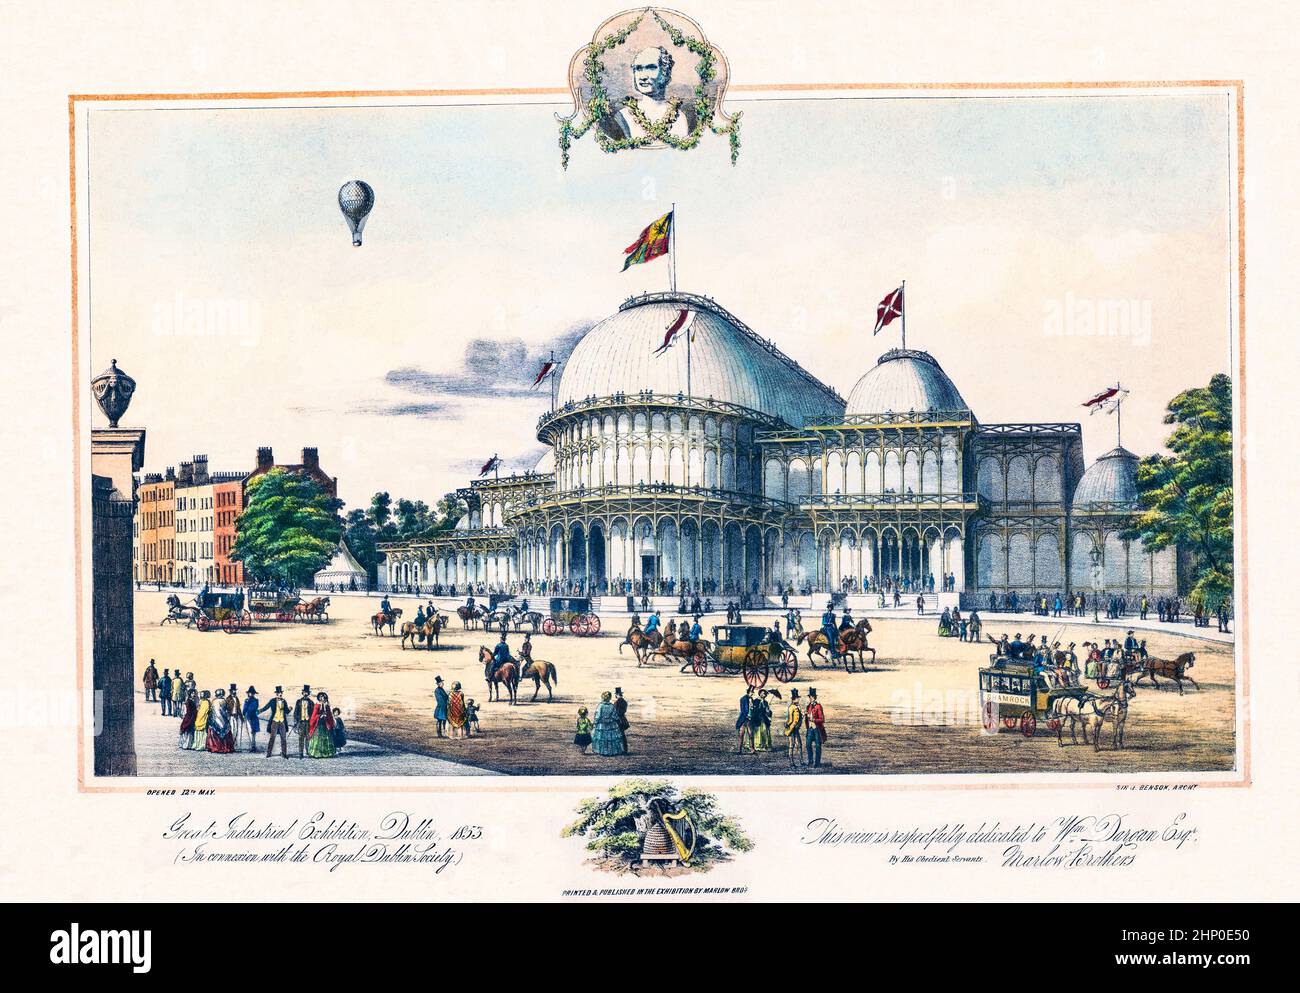 A 19th Century artwork of the Great Industrial Exhibition in 1853 was held in Dublin, Ireland, the largest international event to be held in Ireland. The Irish Industrial Exhibition Building, located on the grounds of Leinster House, housed the entire fair. It lasted from 12 May to 31 October, Queen Victoria accompanied by the Prince Consort and the Prince of Wales, paid an official visit on 29 August. It was entirely funded by William Dargan, an entrepreneur and developer of Irish railways who gave over £300,000 sponsorship to introduce the industrial revolution to Ireland. Stock Photo